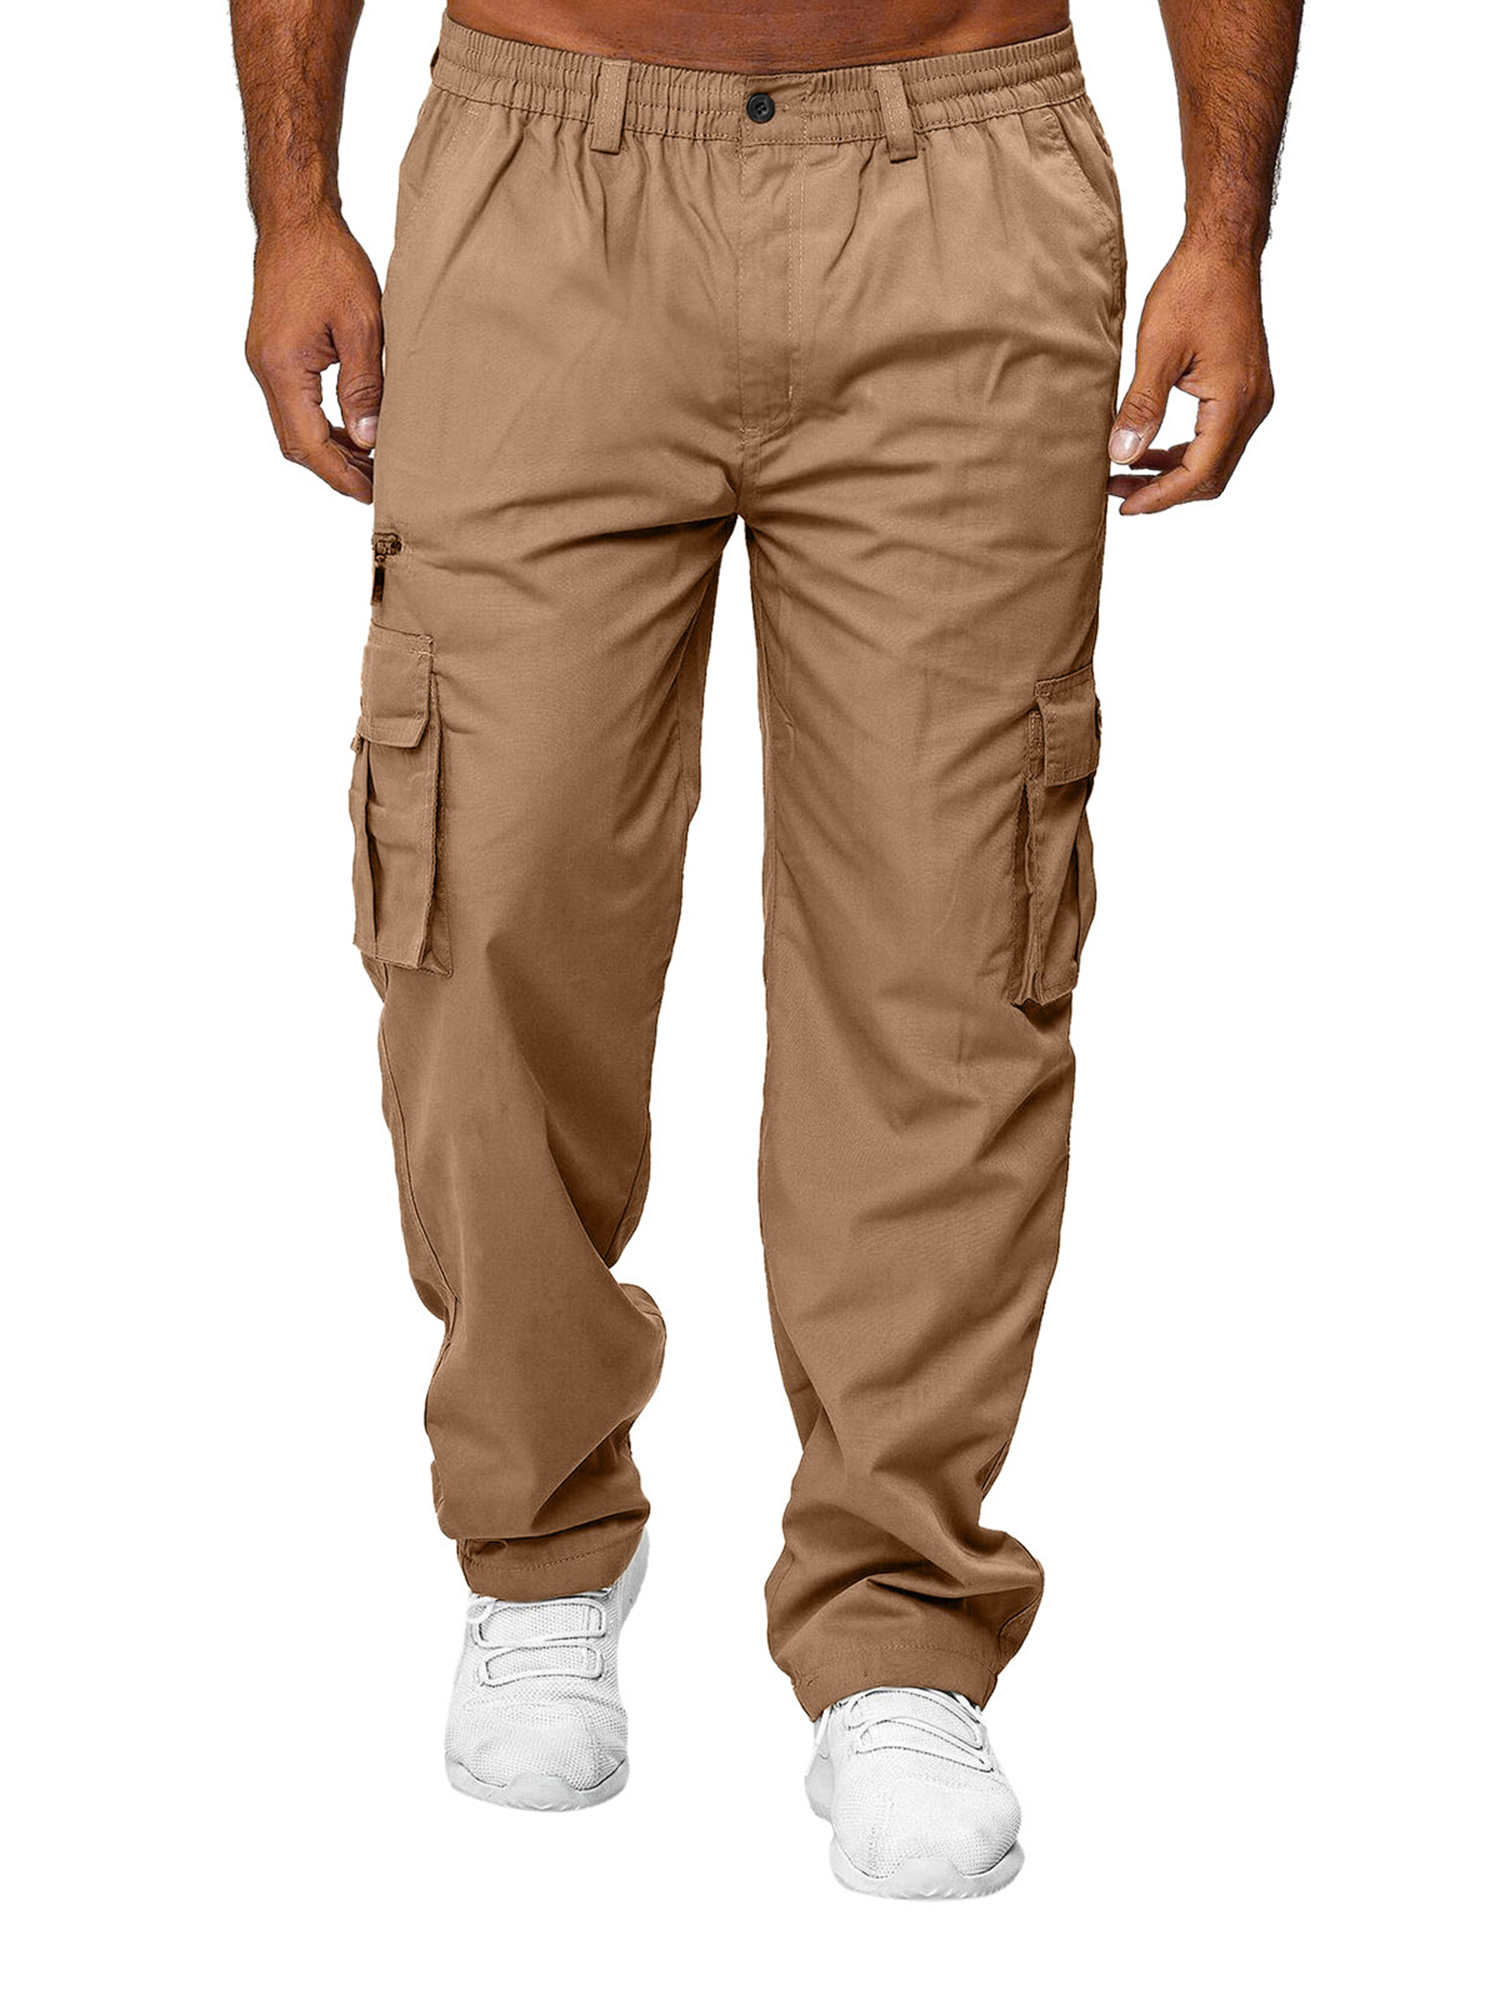 Mens Cargo Work Pants with Side Pockets Elastic Waist Straight Military ...